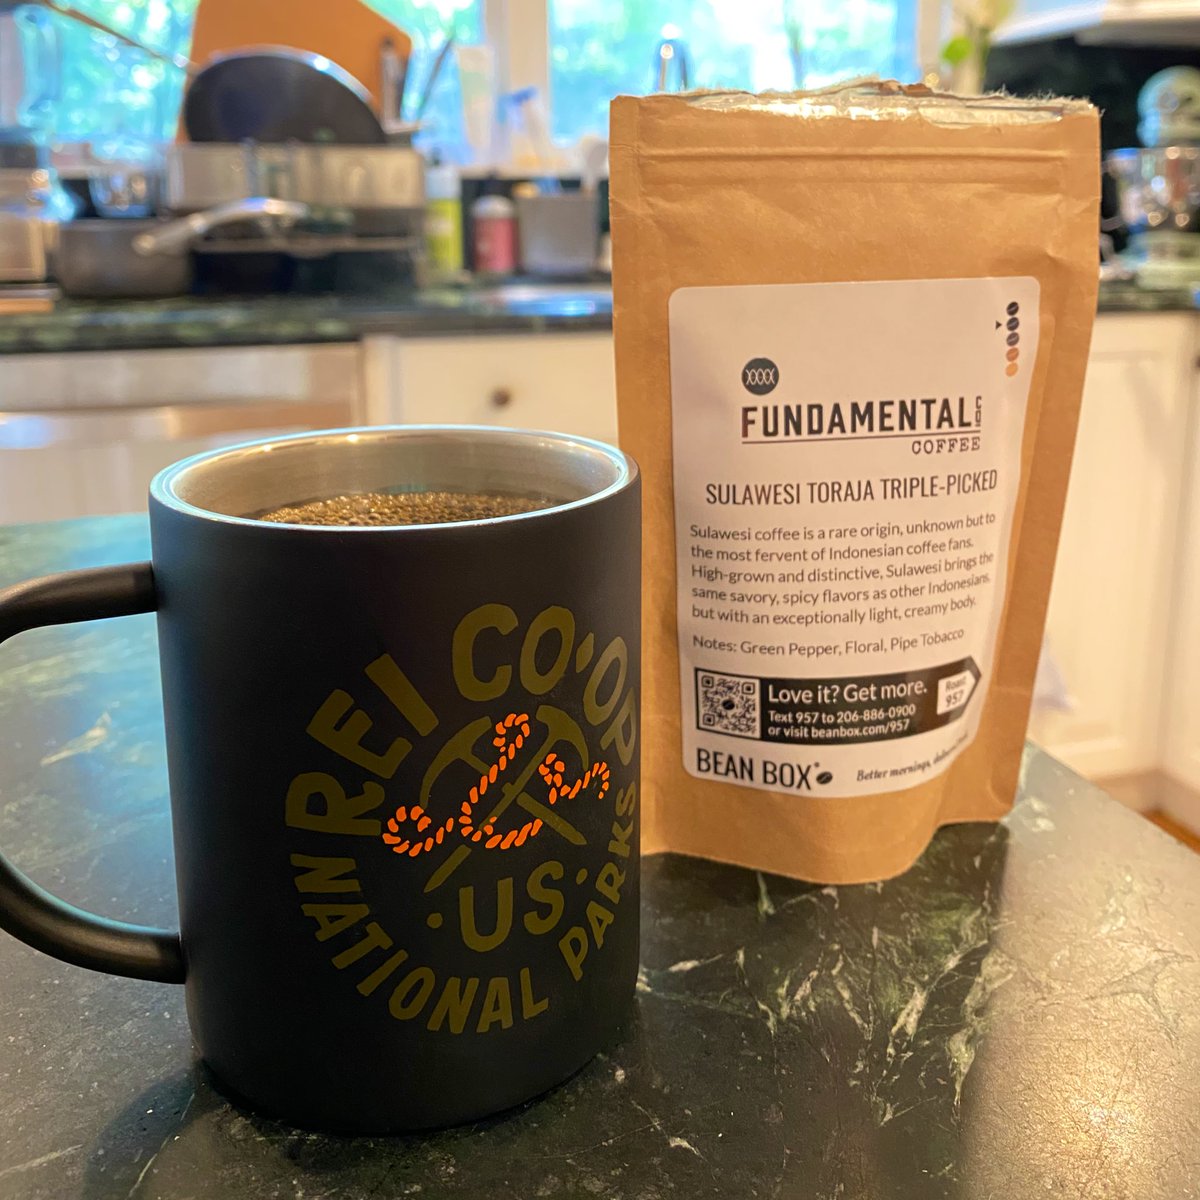 Fundamental Coffee Co. Sulawesi Toraja Triple-PickedTwo mornings in a row with a Sulawesi brew, what a treat! Digging this one a bit more, as it’s got some spice to balance the sweetness. Definitely recommend finding beans from this region, it’s delightful.